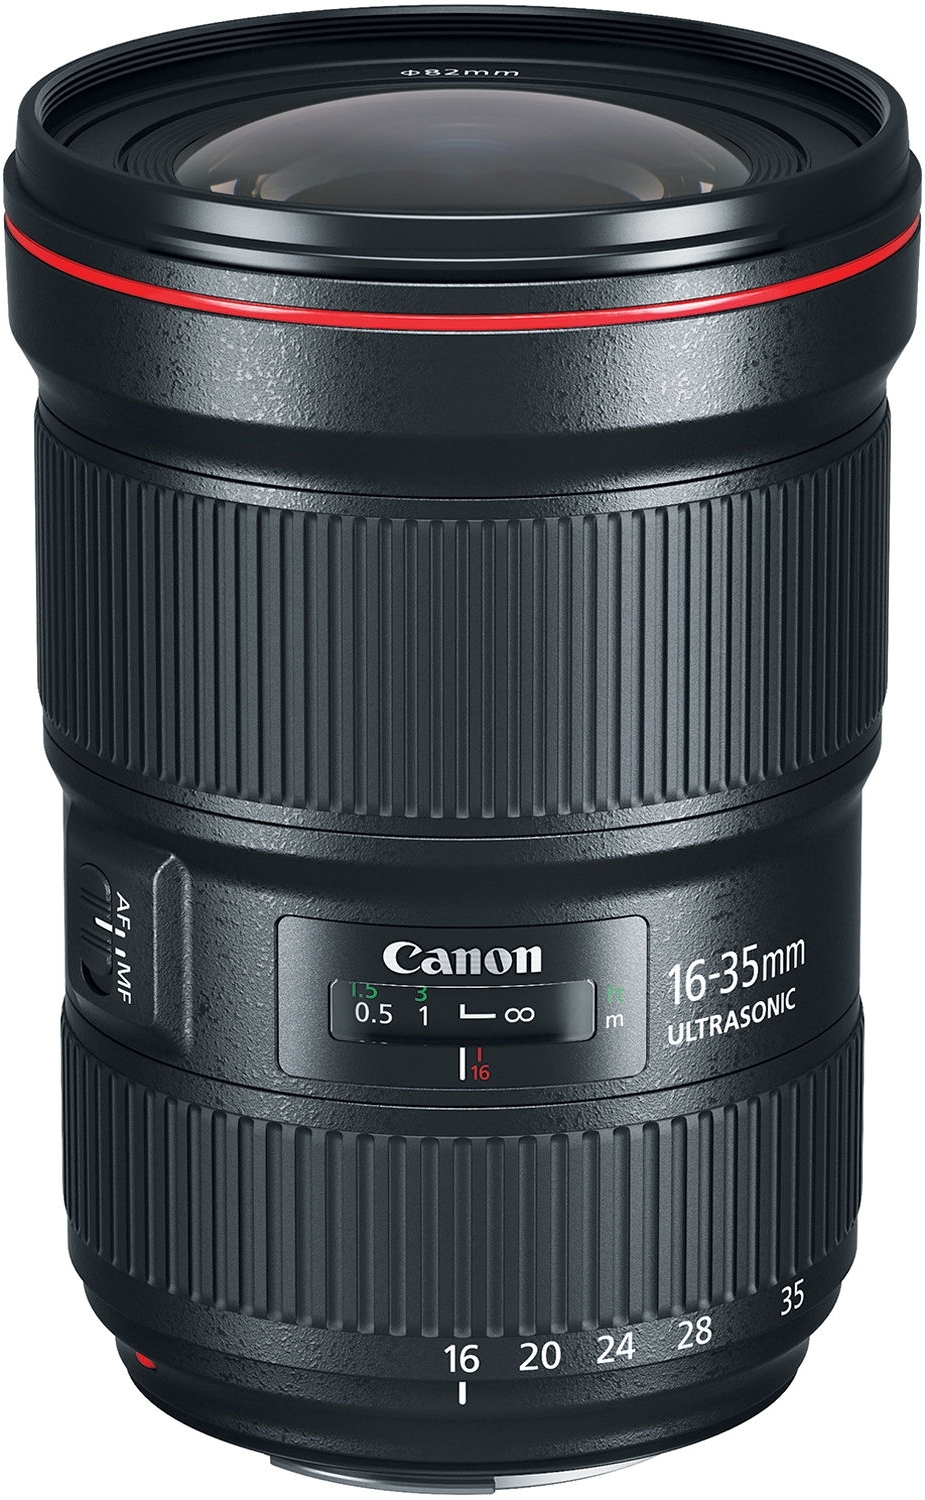 Objectif Canon Ef 16-35 Mm F/2.8 L Iii Usm - Ouverture F/2.8 - Distance Focale 16-35 Mm - Poids 790 G